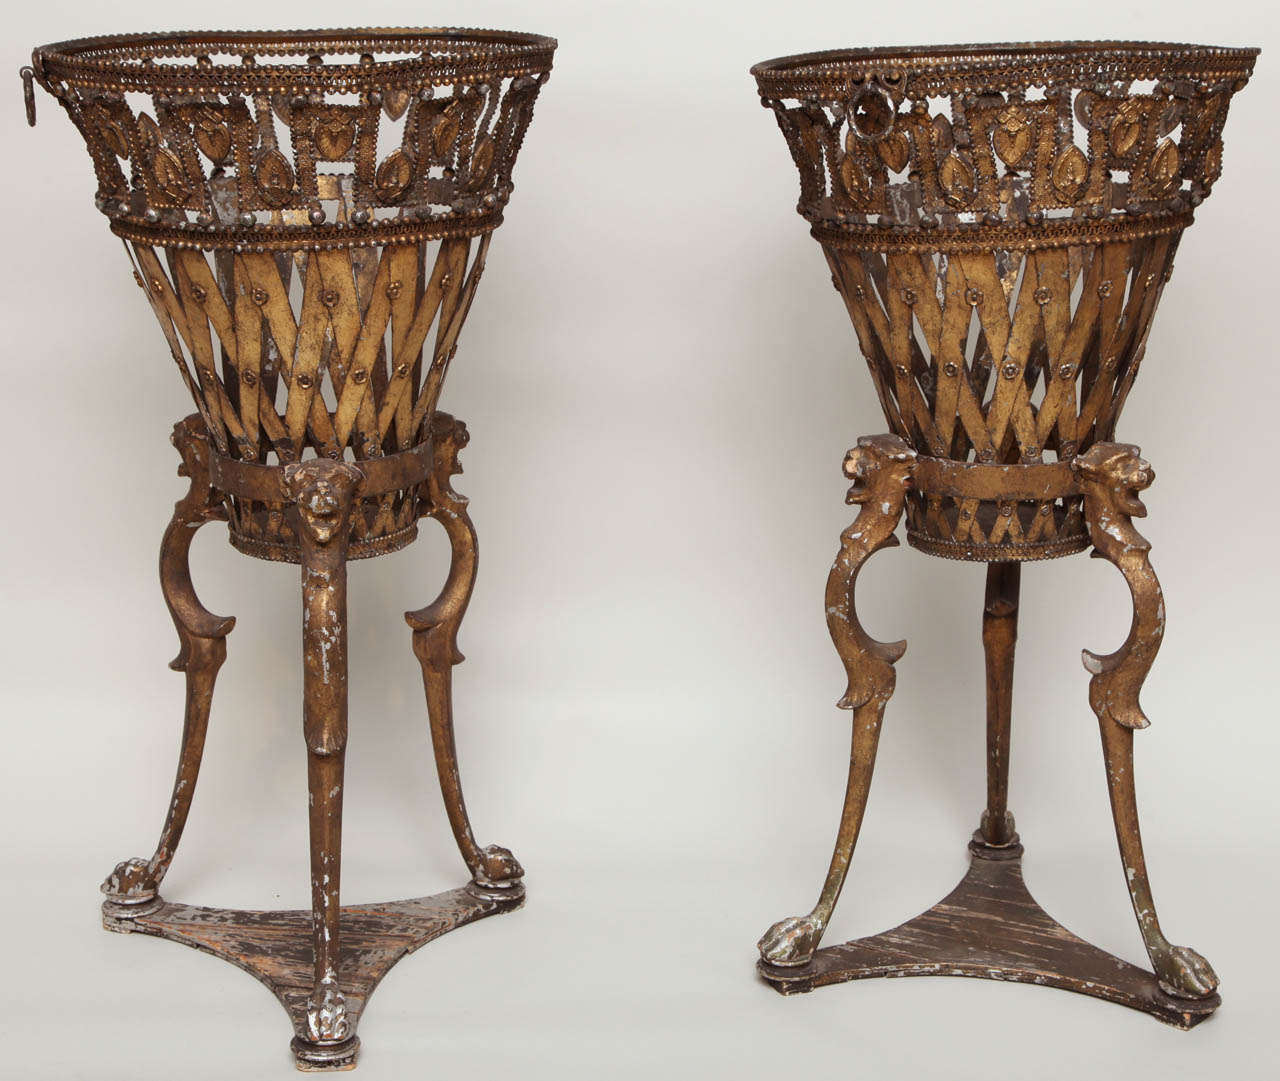 Most unusual pair of Regency tole and wood jardinieres , the removable openwork basket tops with palmette and bead decoration, the iron and wood bases of tripod form, the whole in untouched 